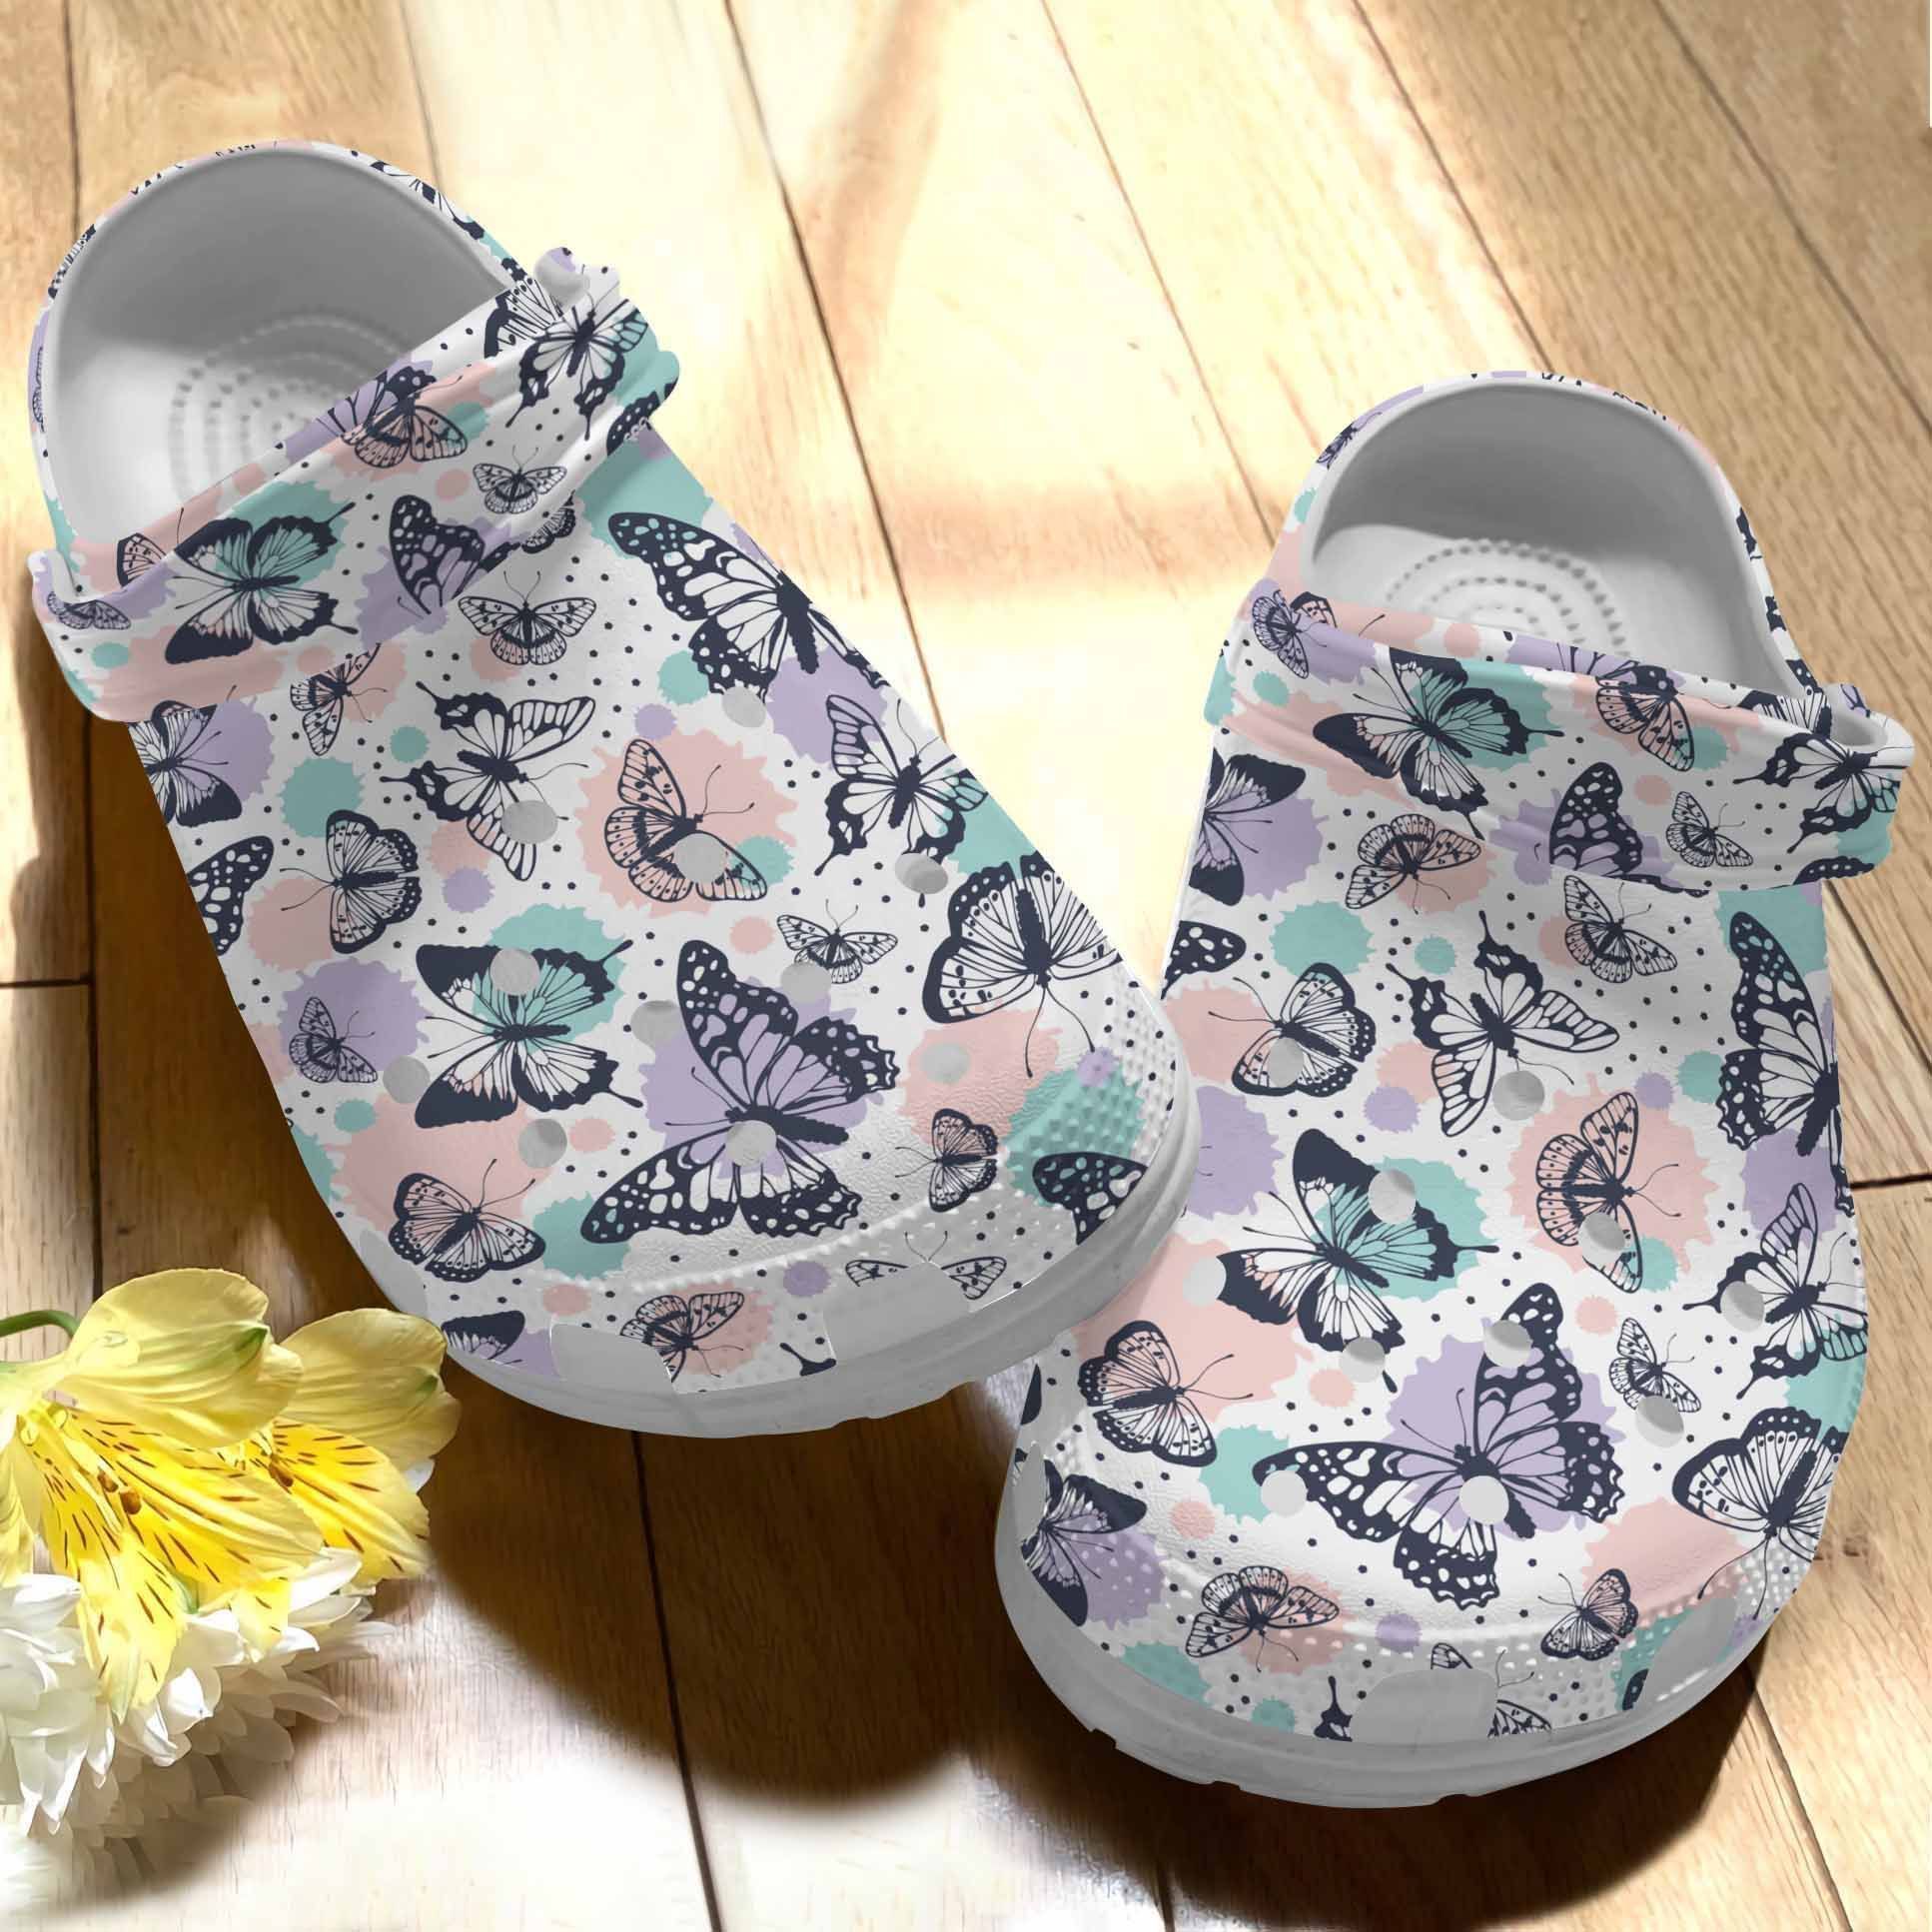 Butterfly Art Shoes Picnic Clog Shoes For Men And Women - Clog Shoes - White